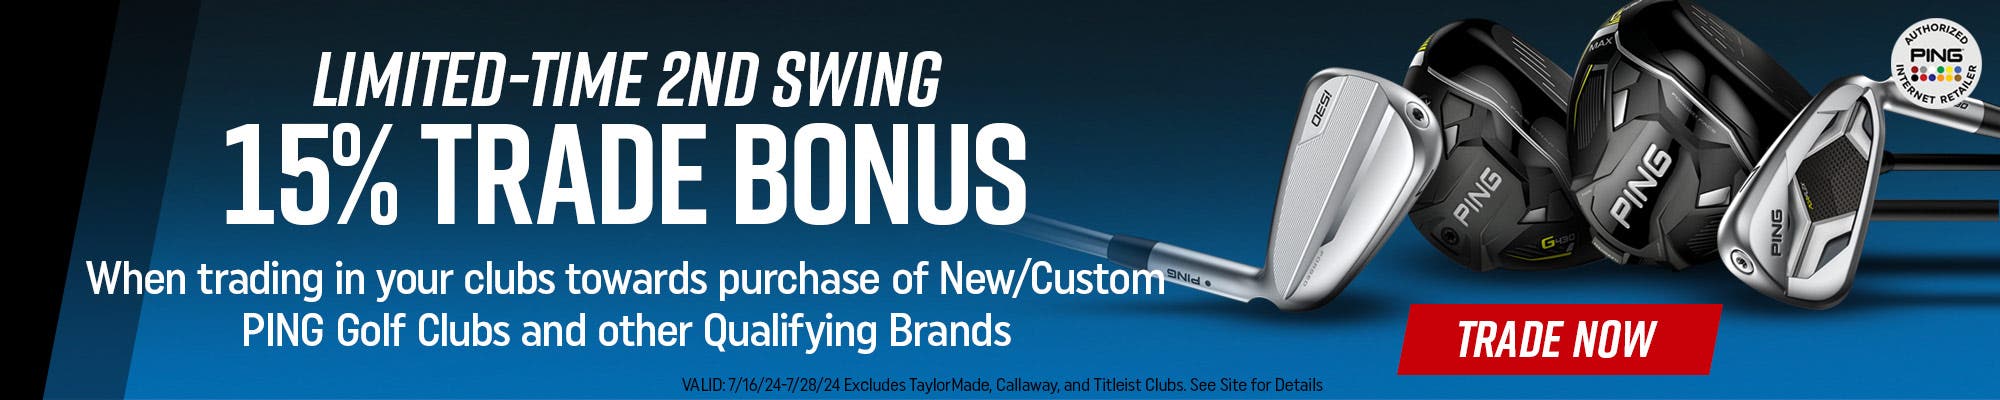 limited time 2nd swing | 15% trade bonus on new ping clubs